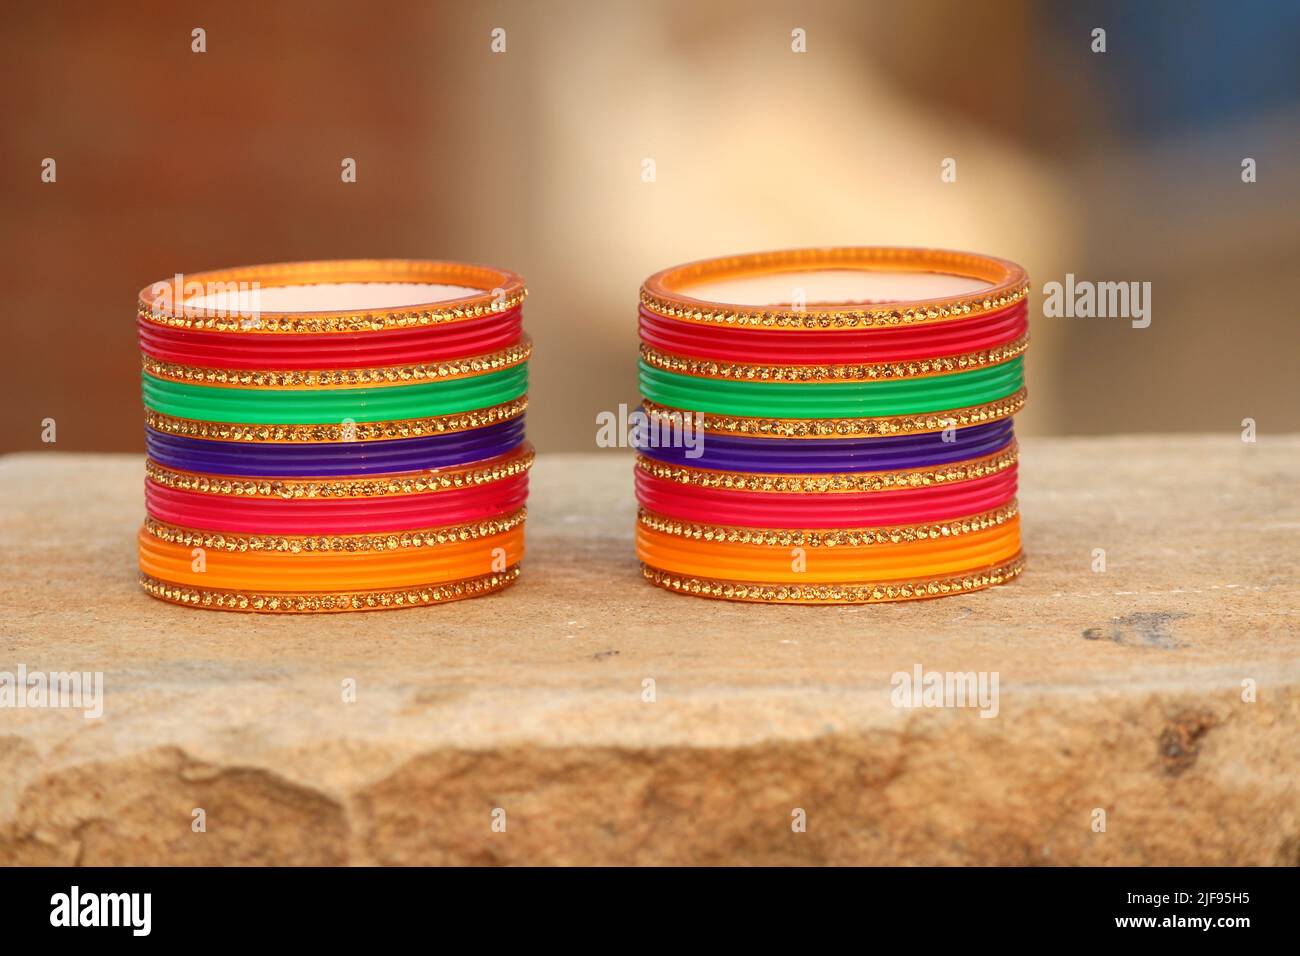 some colorful bangles put on stone Stock Photo